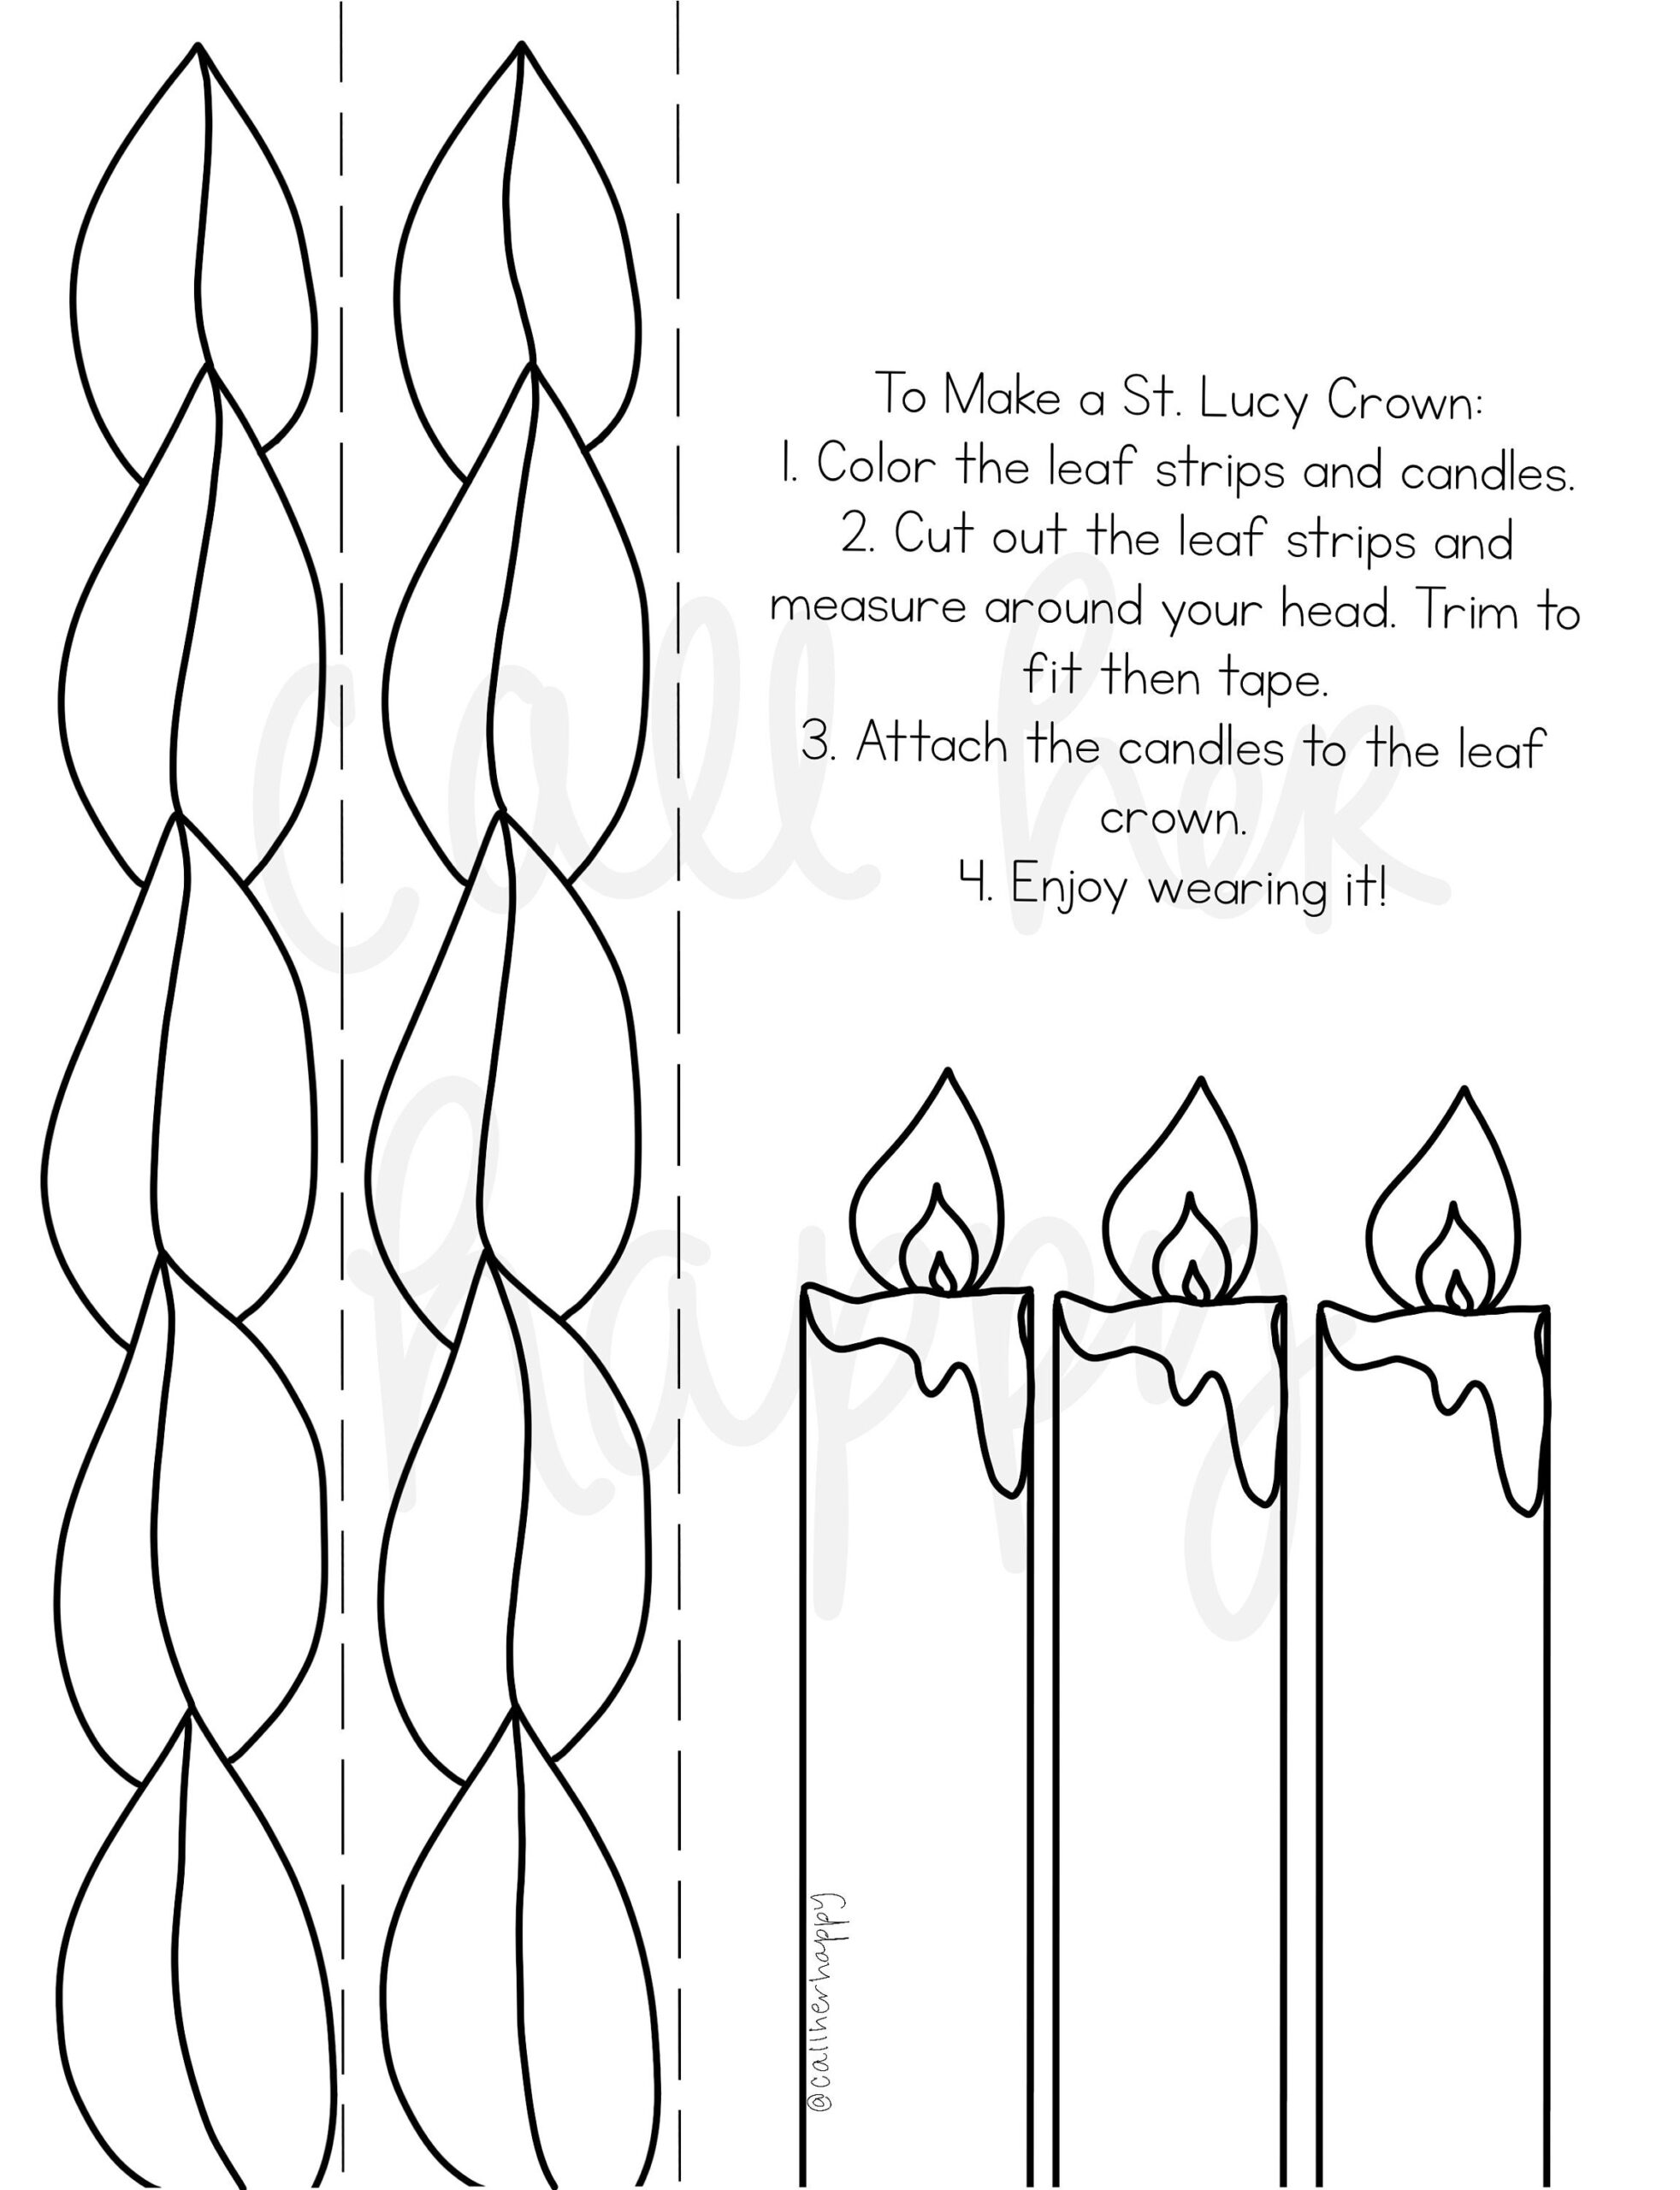 St Lucy Crown Christmas Printable Coloring Page Sheet Lazy Liturgical Year Catholic Resources For Kids Feast Day Prayer Activities Jesus Etsy